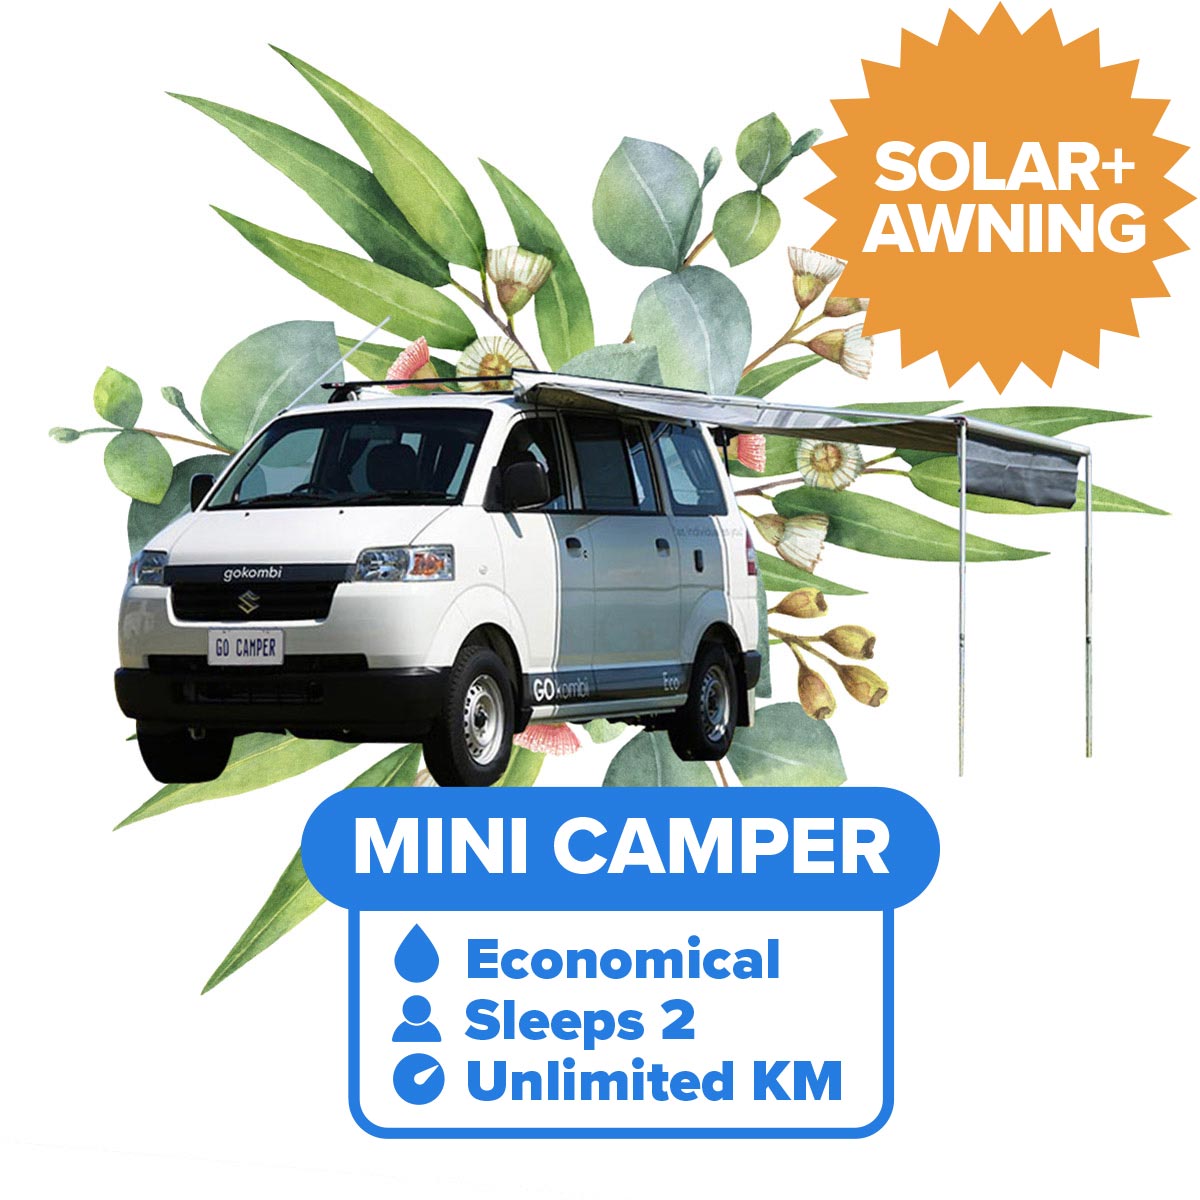 Campervan Hire Perth, Mini Camper, sleeps 2 with unlimited km